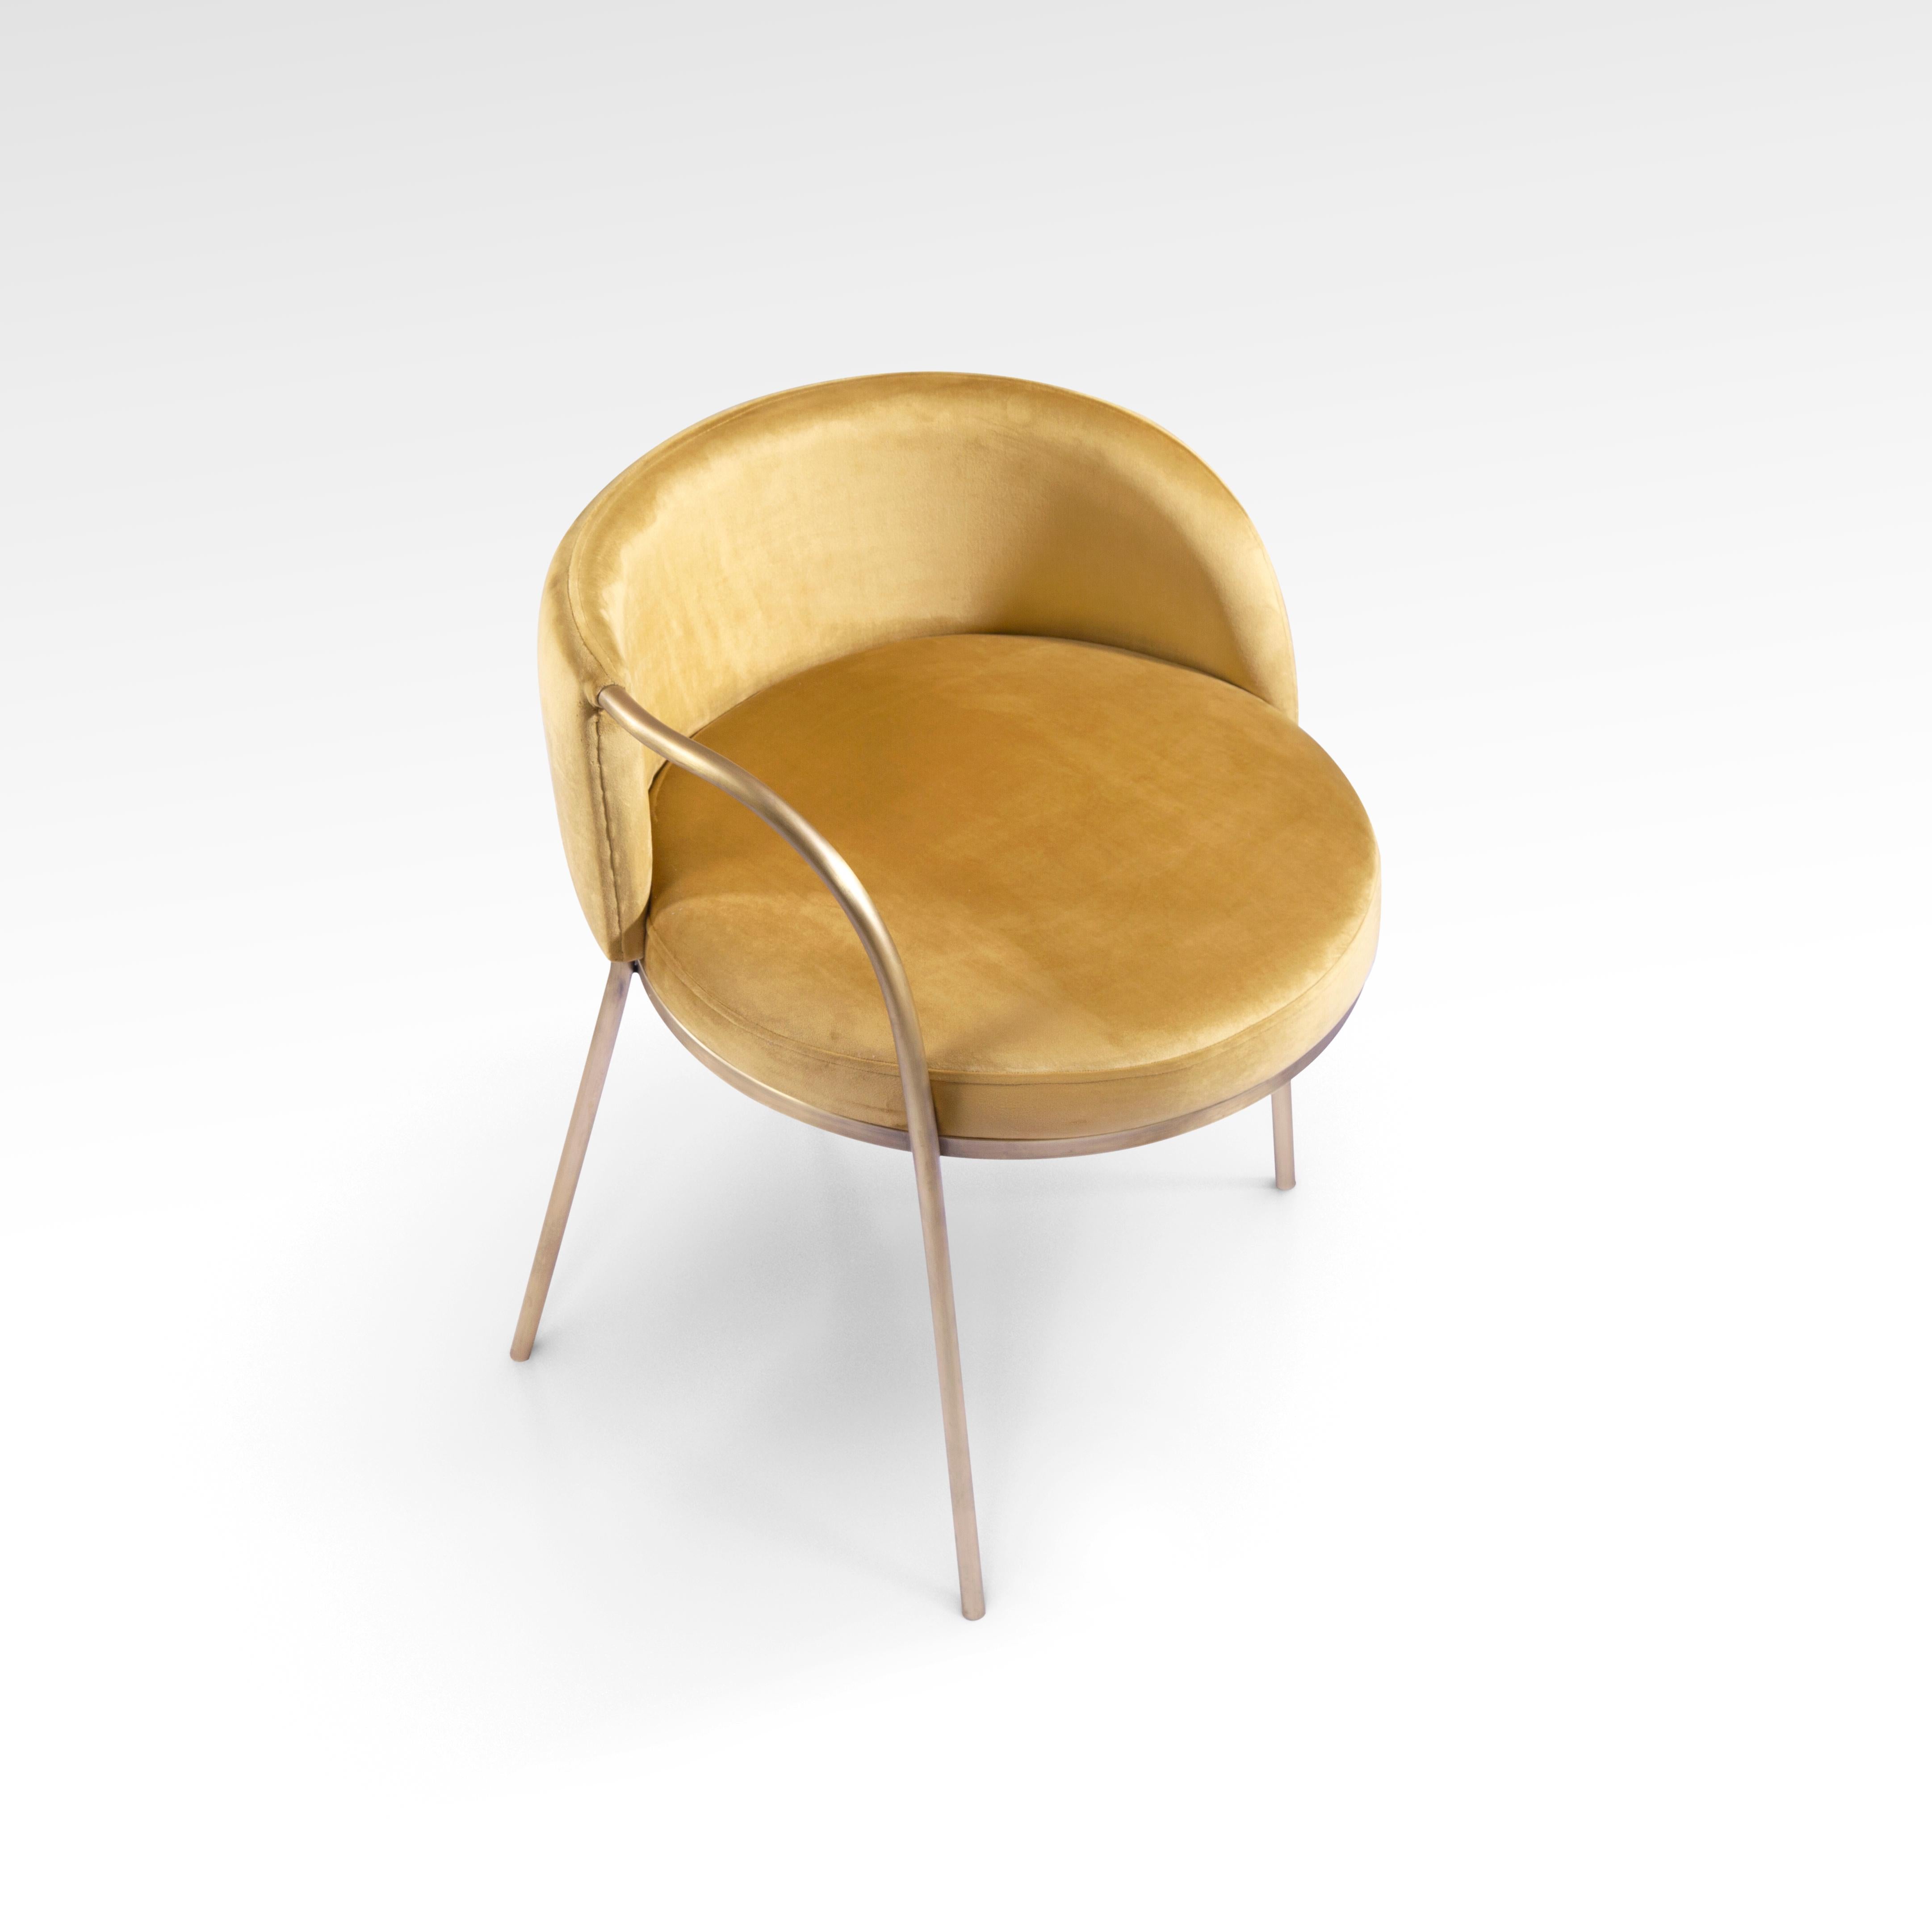 Egyptian Luxurious Modern Dining Chair with Golden Stainless Steel and Velvet Upholstery For Sale